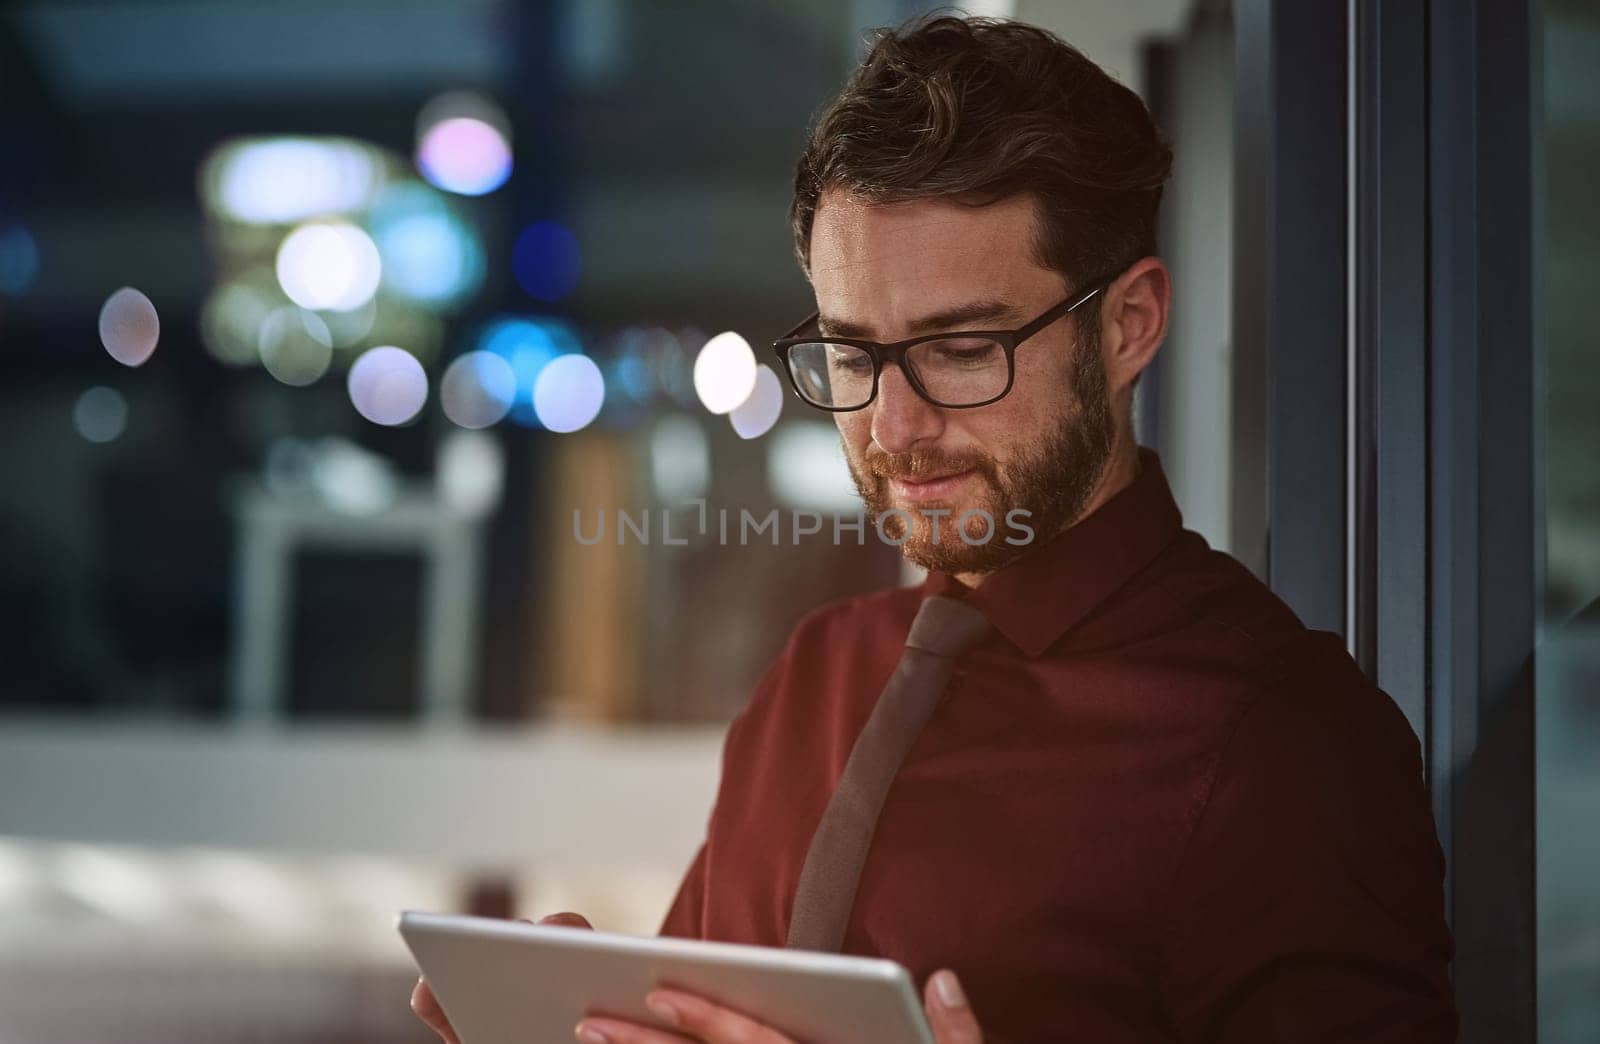 Loading his tablet with business apps. a young businessman using a digital tablet in a modern office